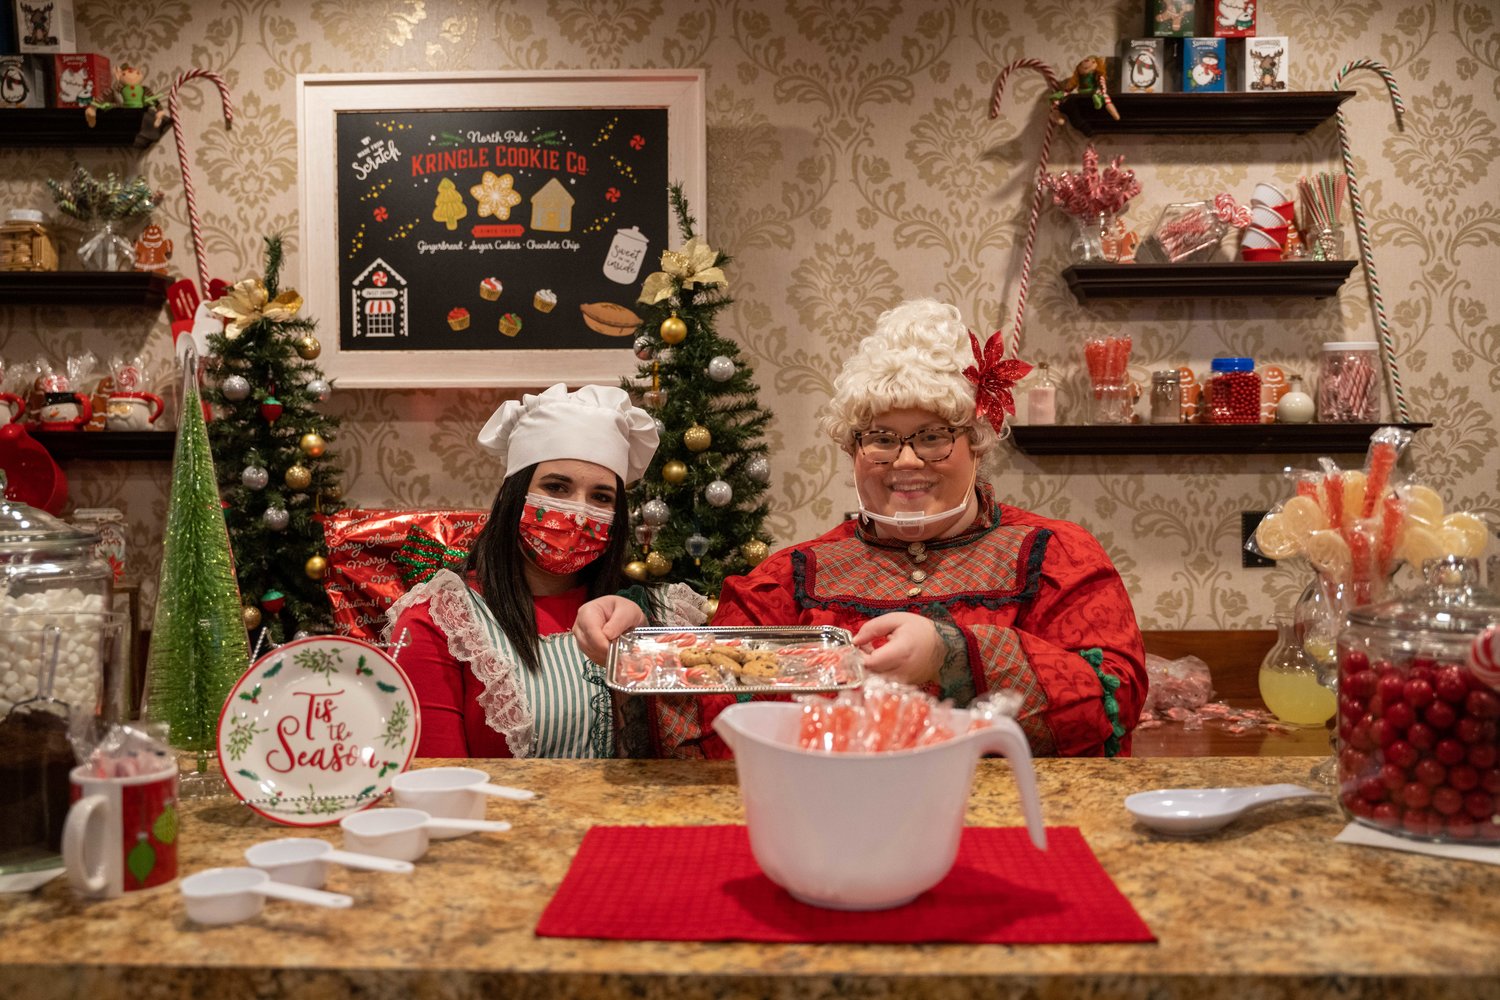 Mrs. Claus and her trusted elf, Cinnamon, work hard to bake Santa's favorite confections to power him through an around-the-world trip of gift-giving.